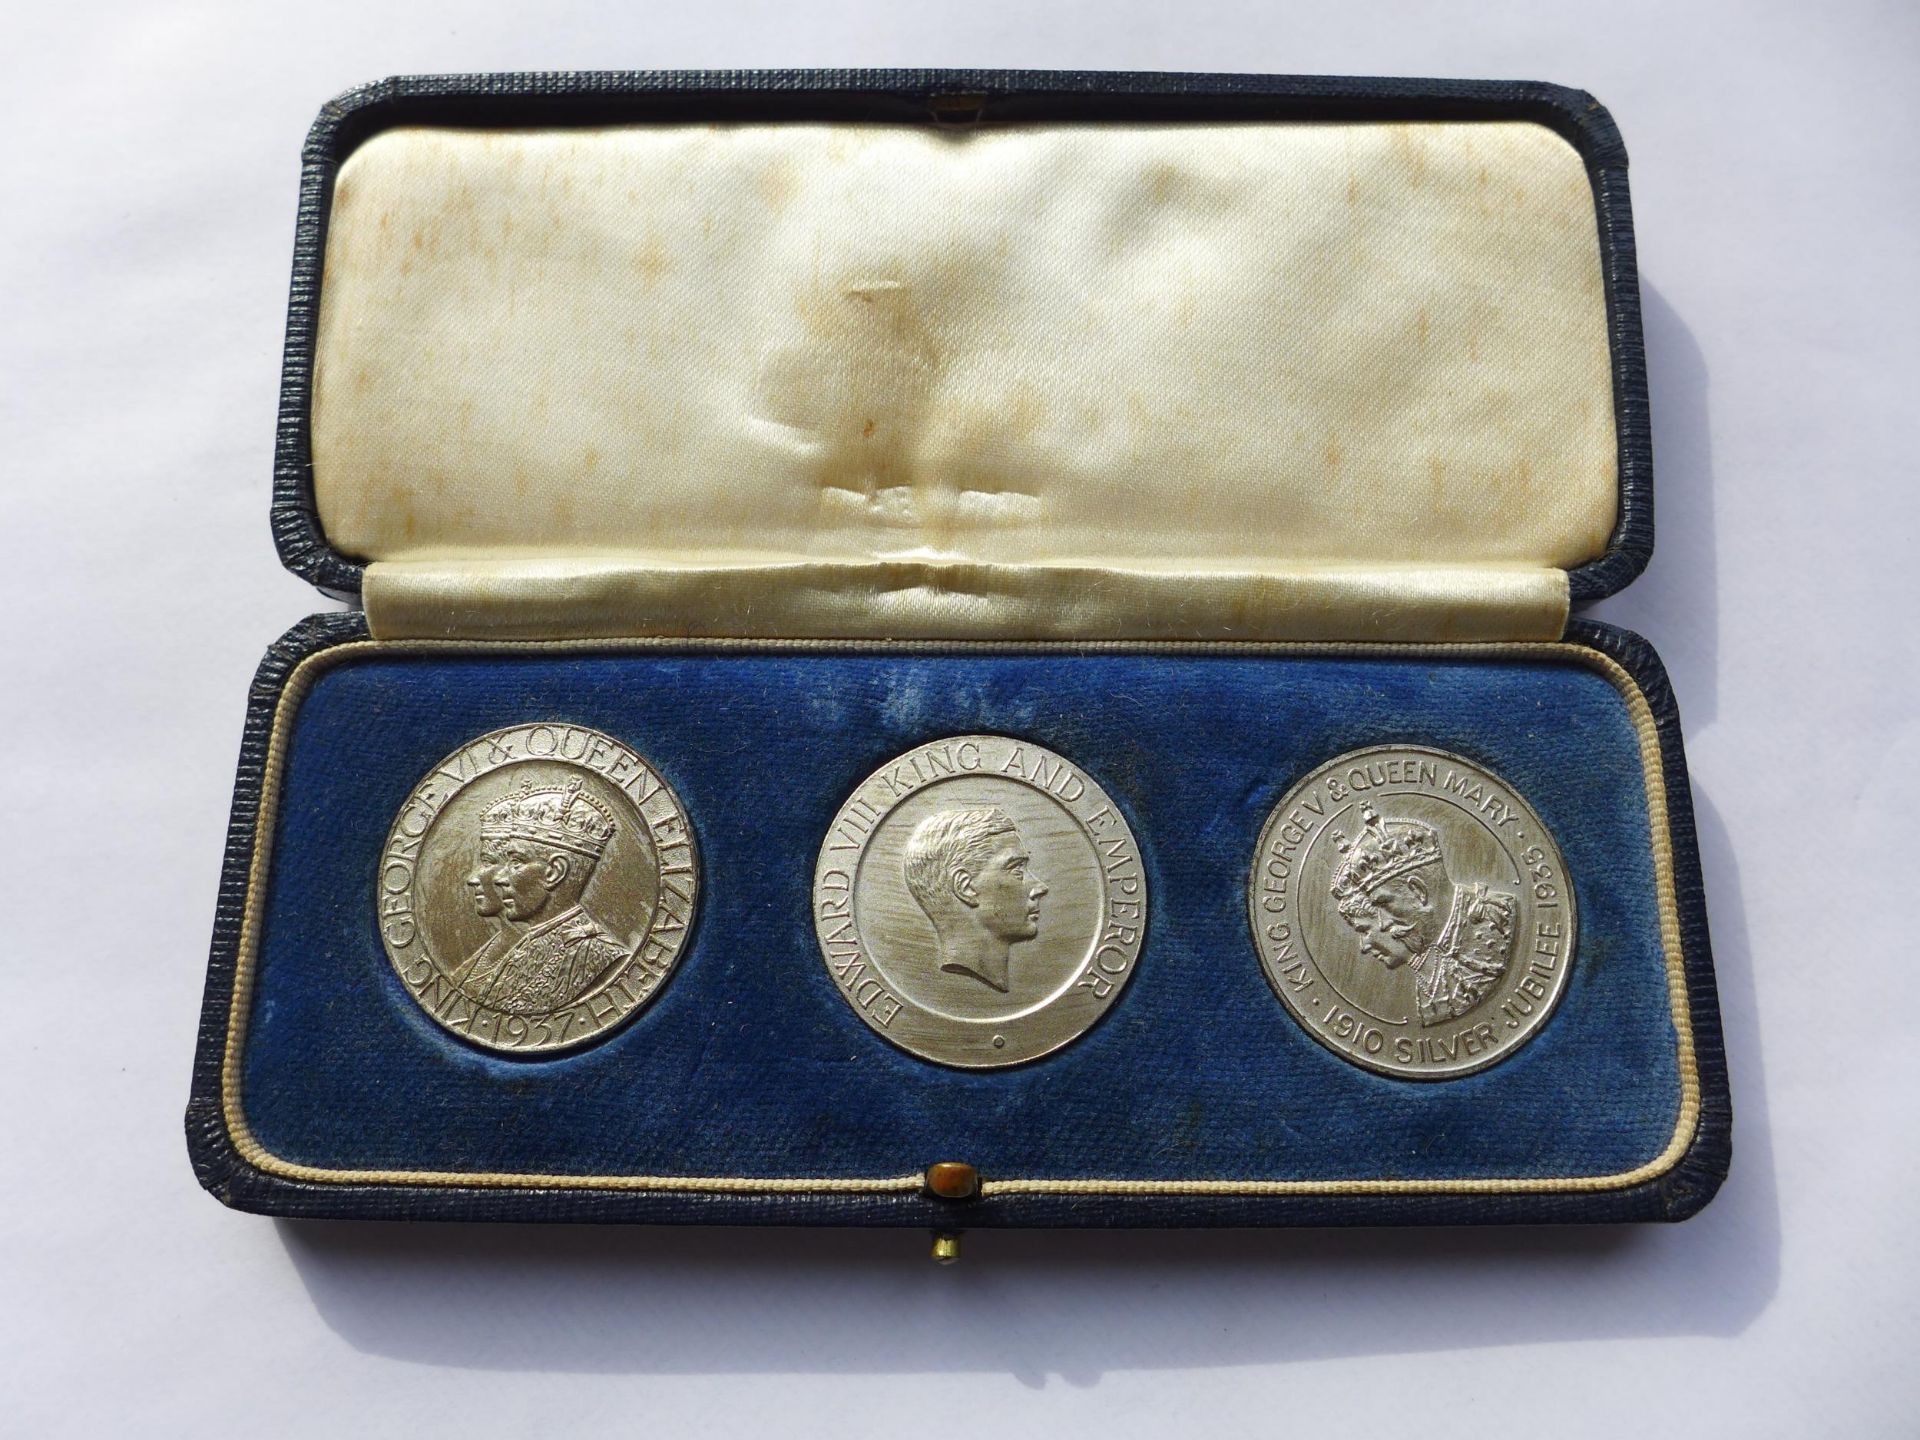 A CASED YEAR OF THE THREE KINGS 1936, COMPRISING THREE SILVER 32MM MEDAL SET, EACH MEDAL BEARS